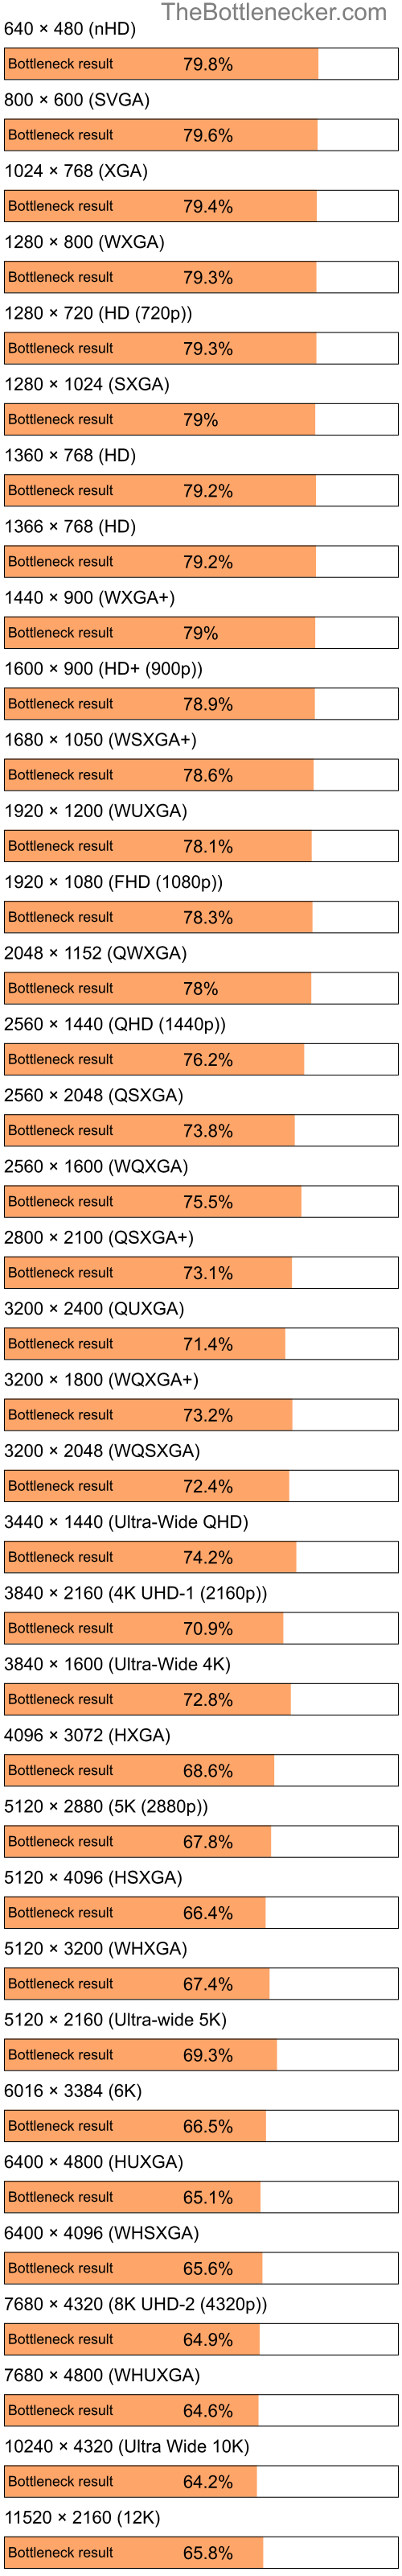 Bottleneck results by resolution for Intel Pentium 4 and NVIDIA GeForce RTX 4050 in Graphic Card Intense Tasks